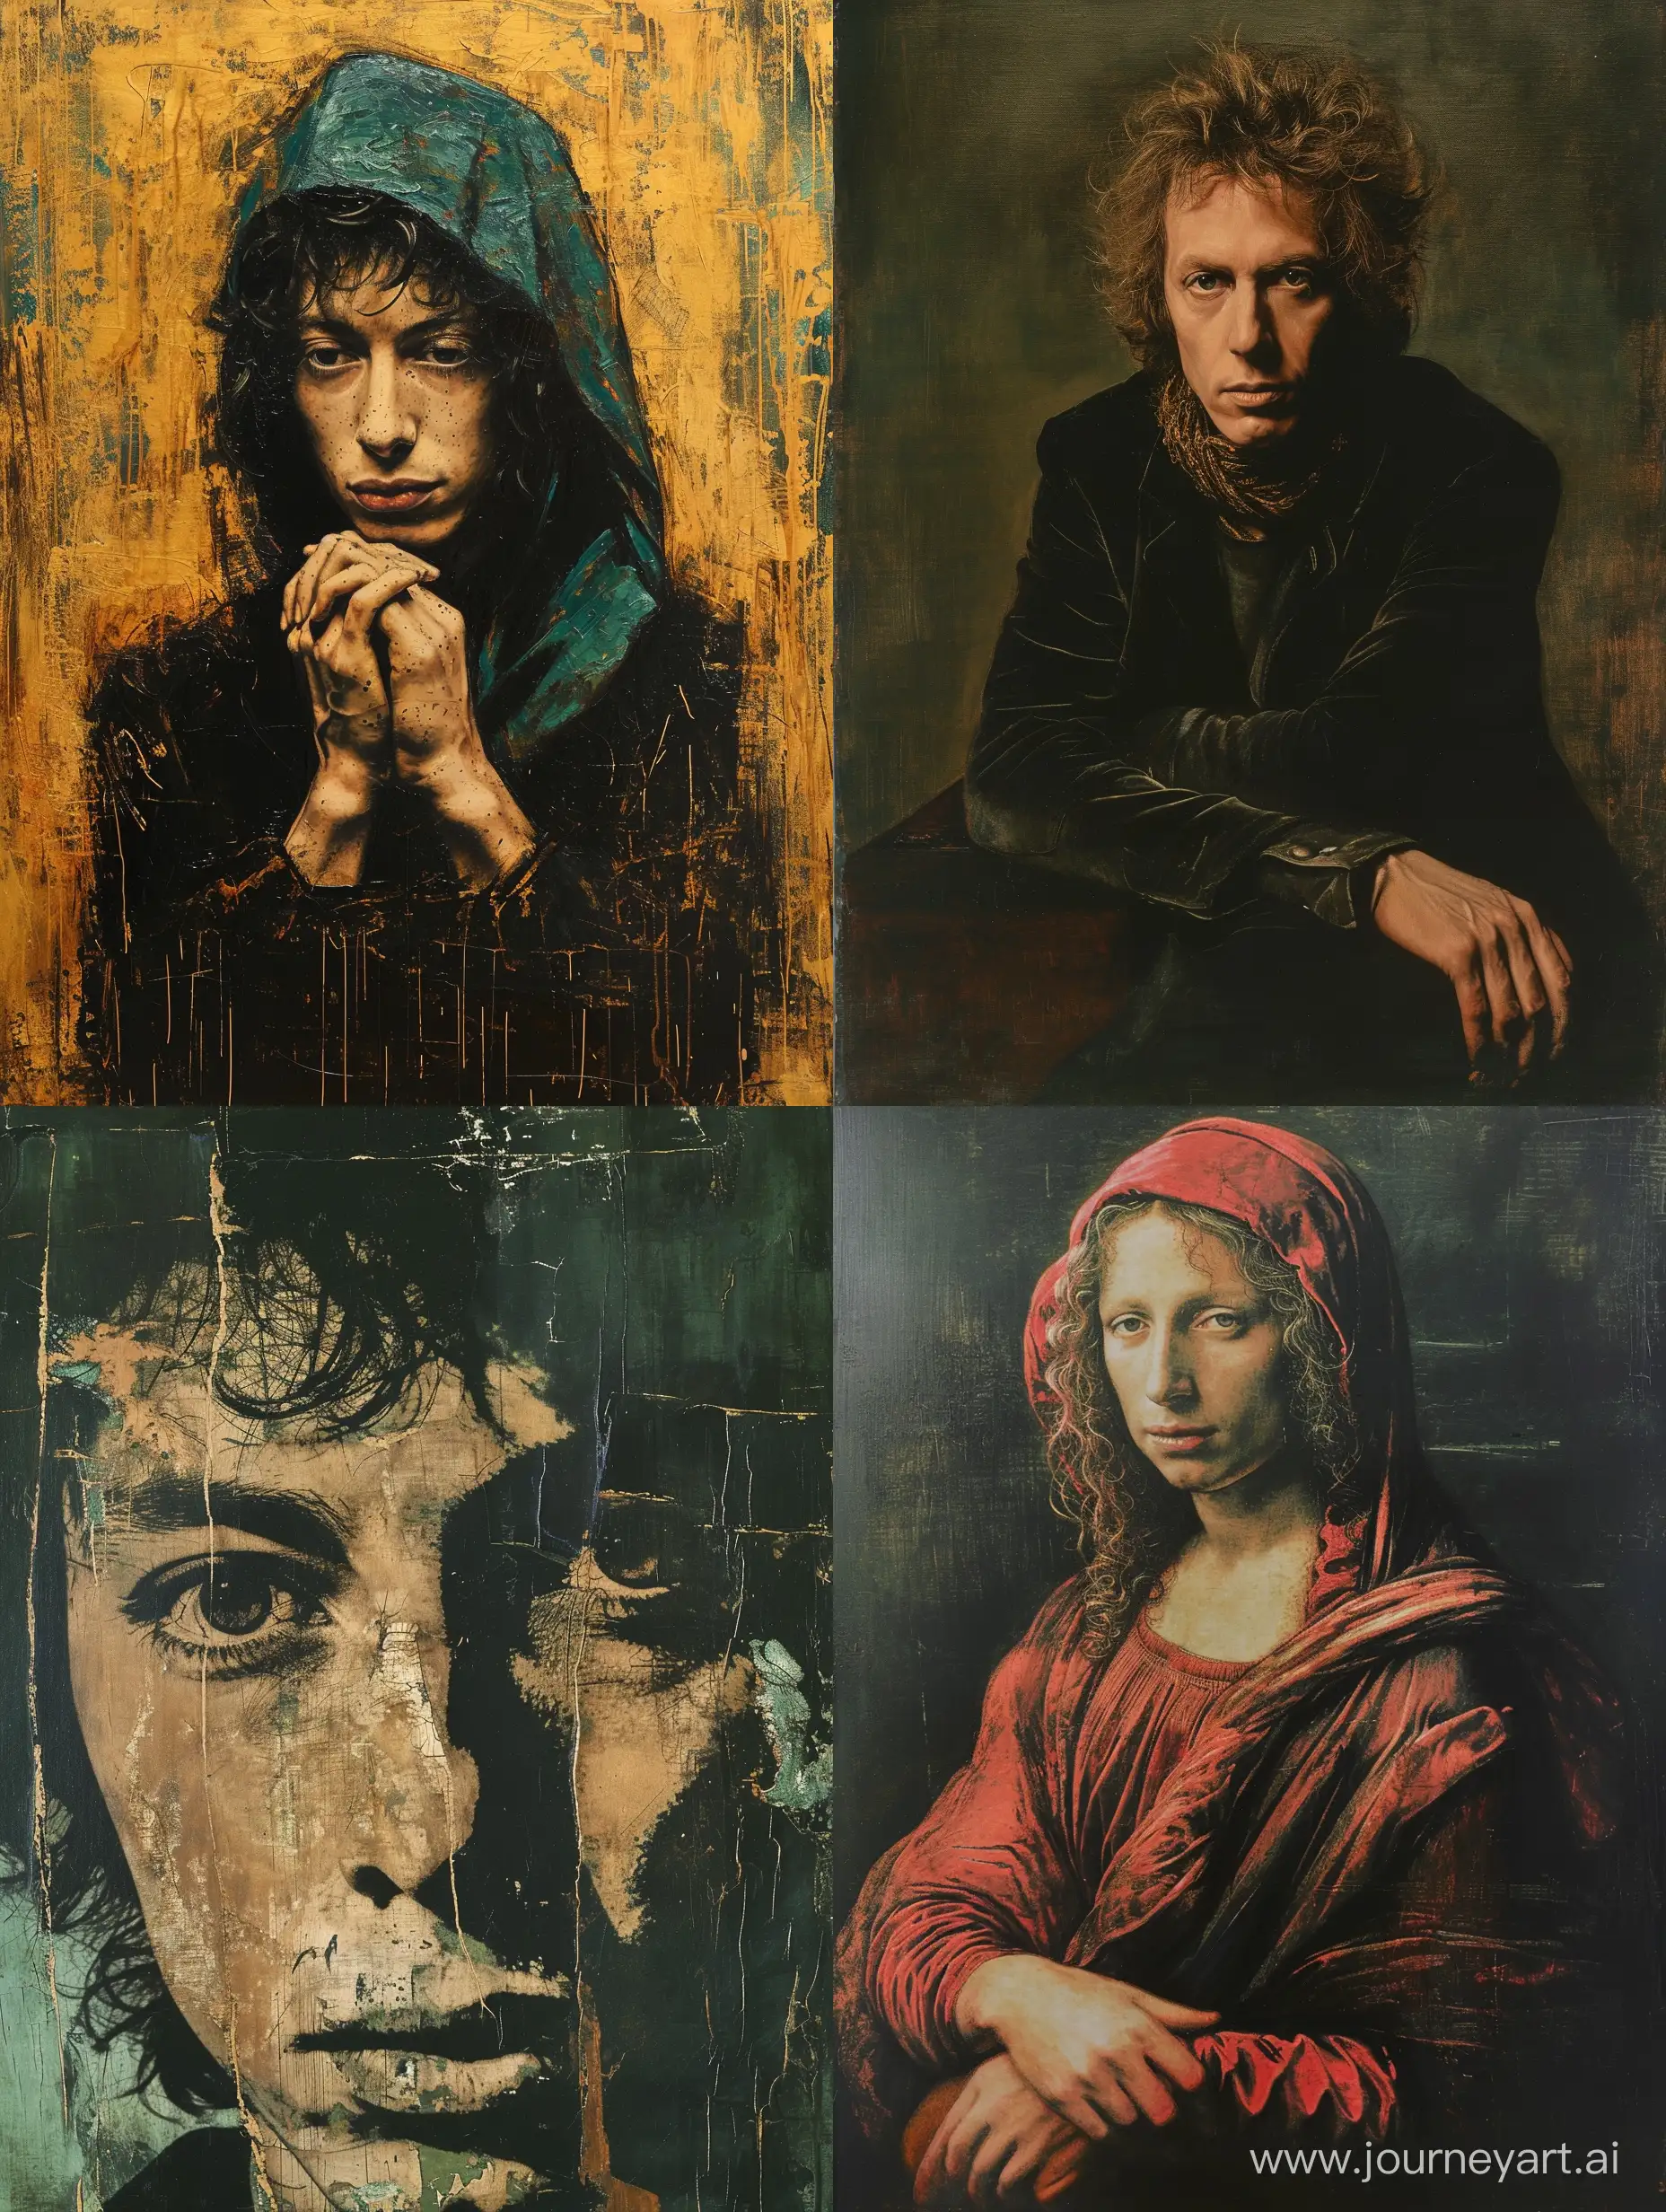 bob dylan in 1966 as a monalisa inspired painting